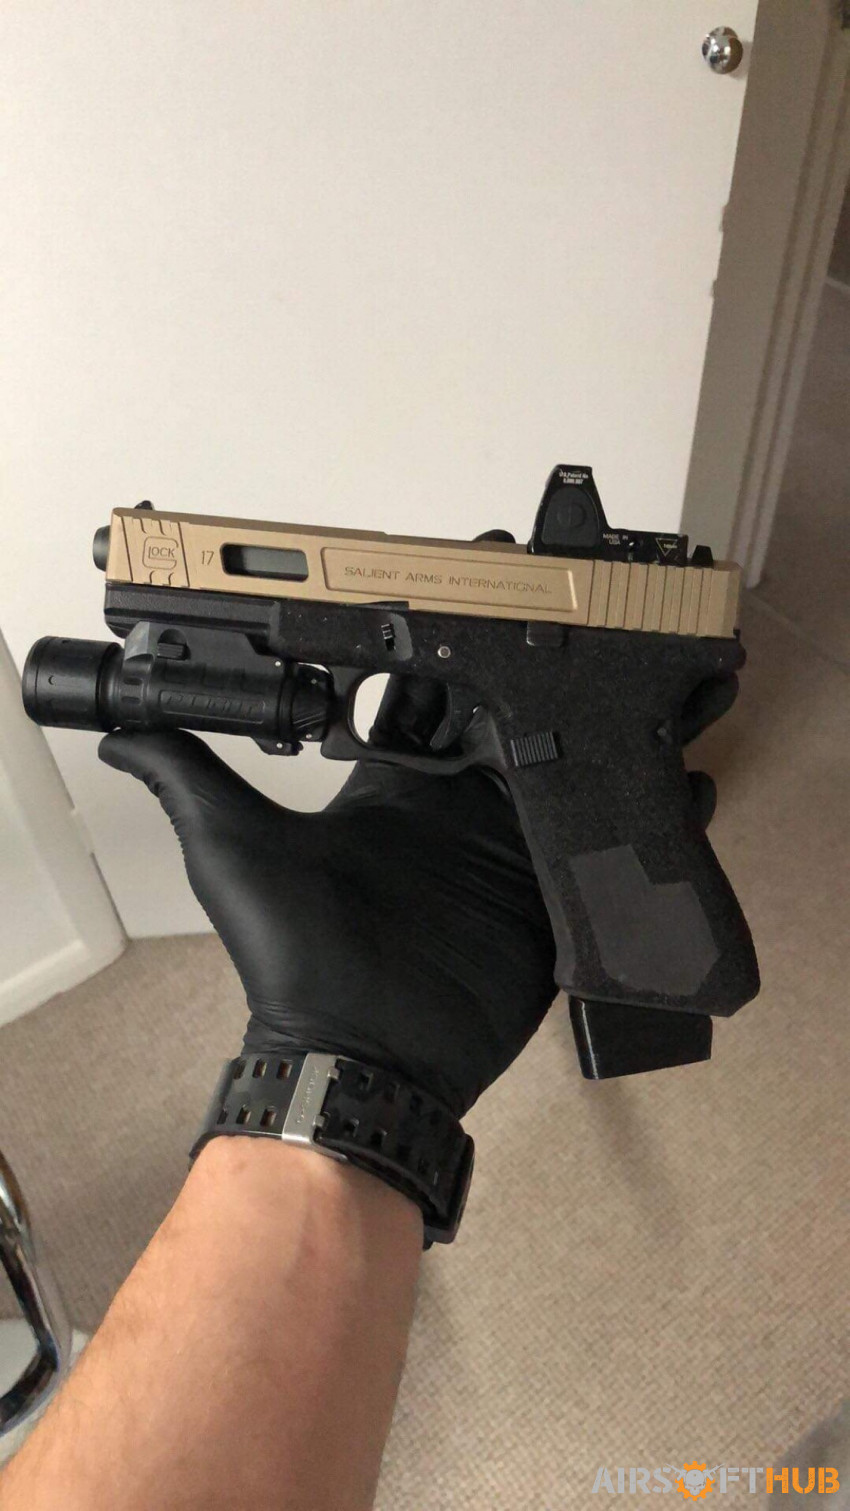 GBB/Co2 Pistol WANTED - Used airsoft equipment